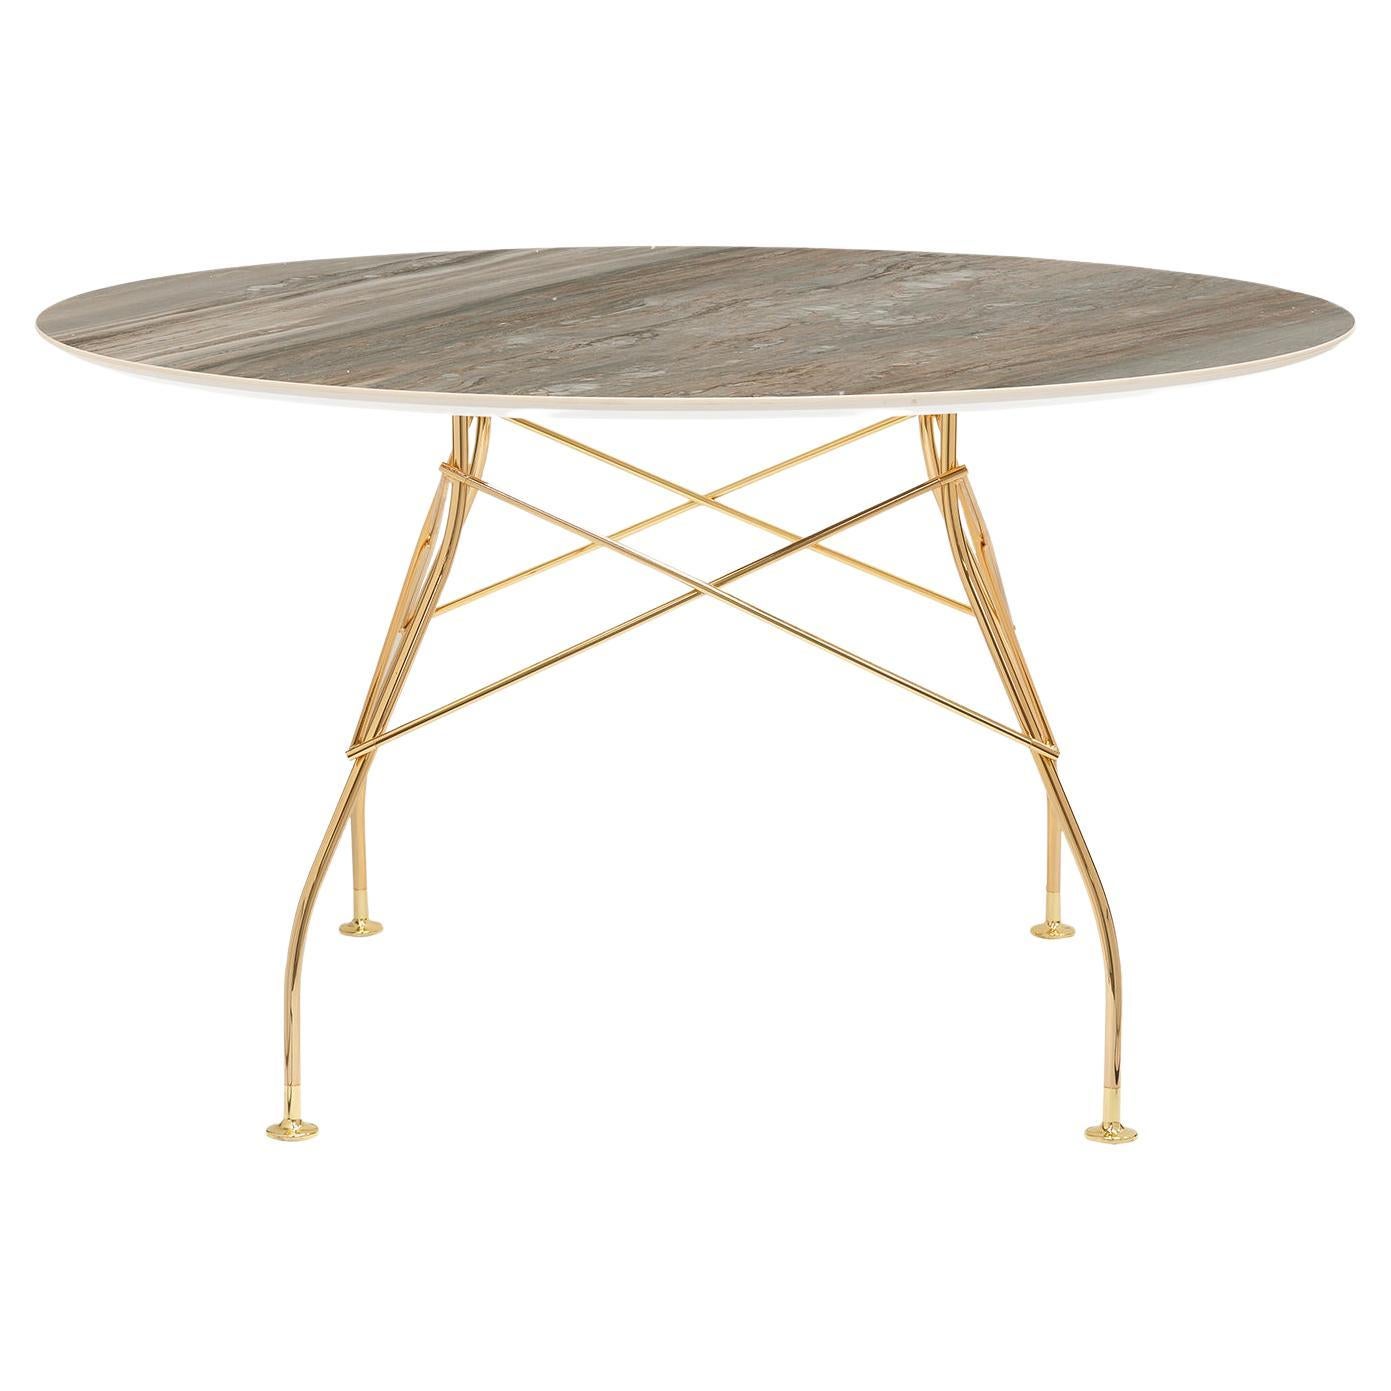 Kartell Round Glossy Table in Tropical Grey Marble by Antonio Citterio